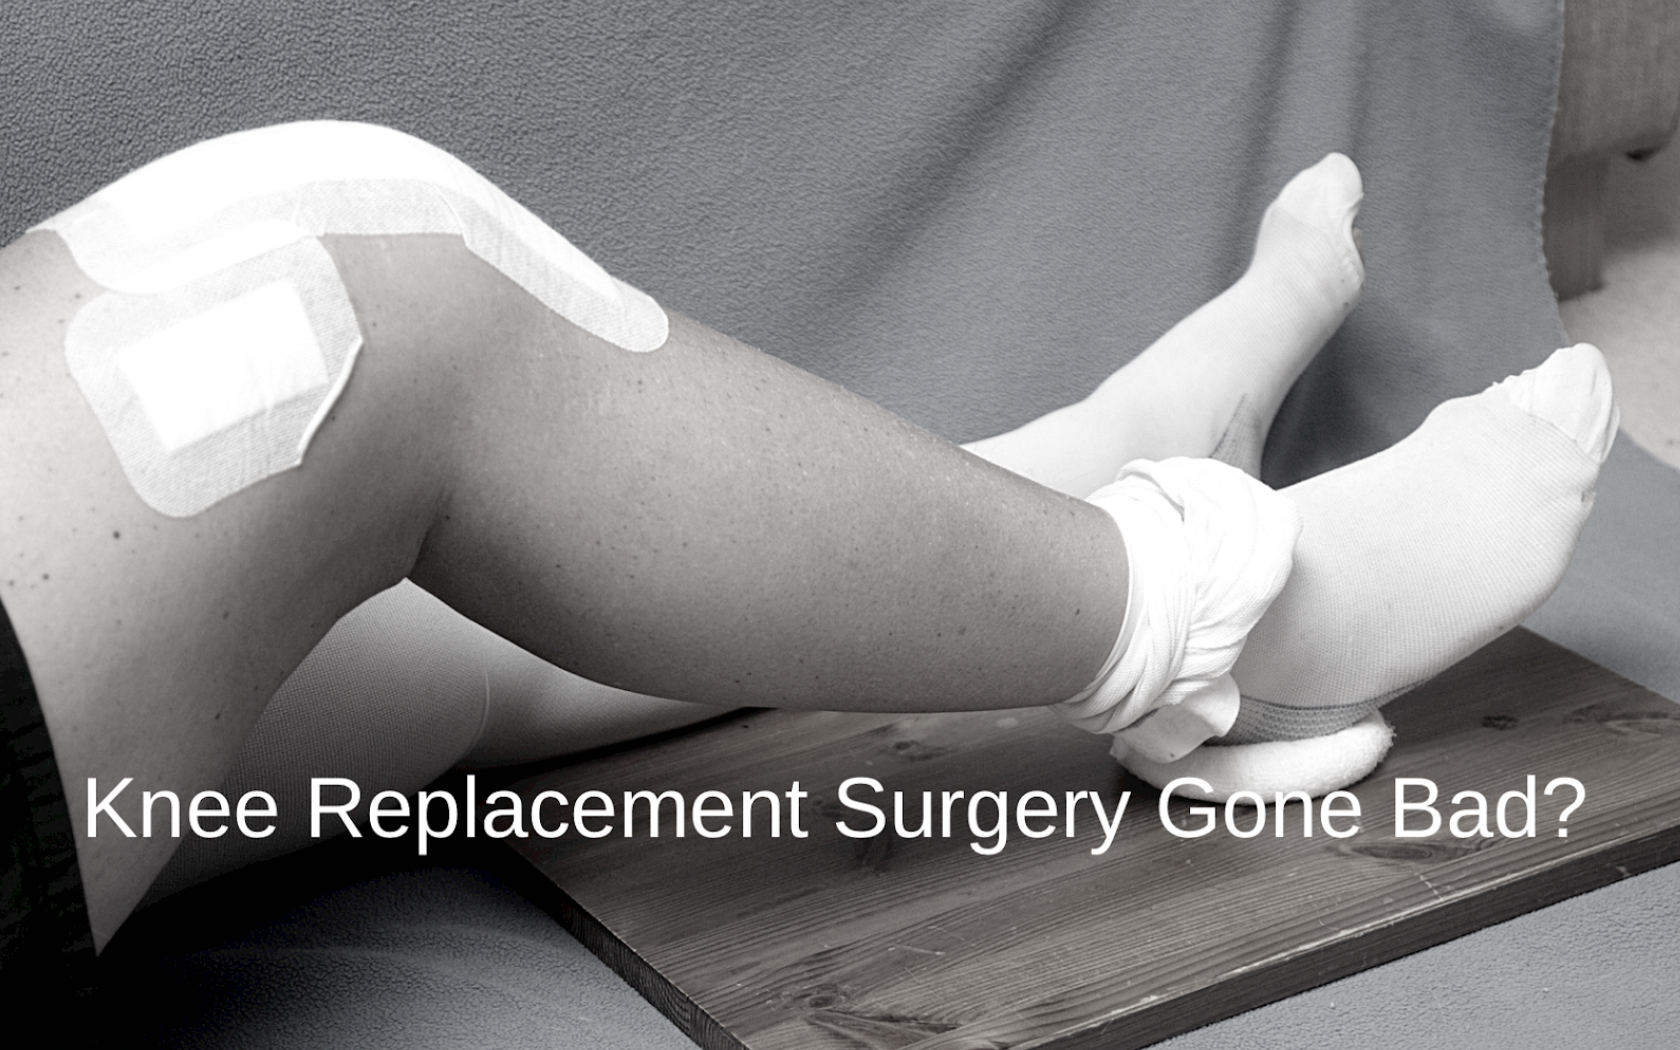 An awry surgery can lead to a knee replacement infection lawsuit.